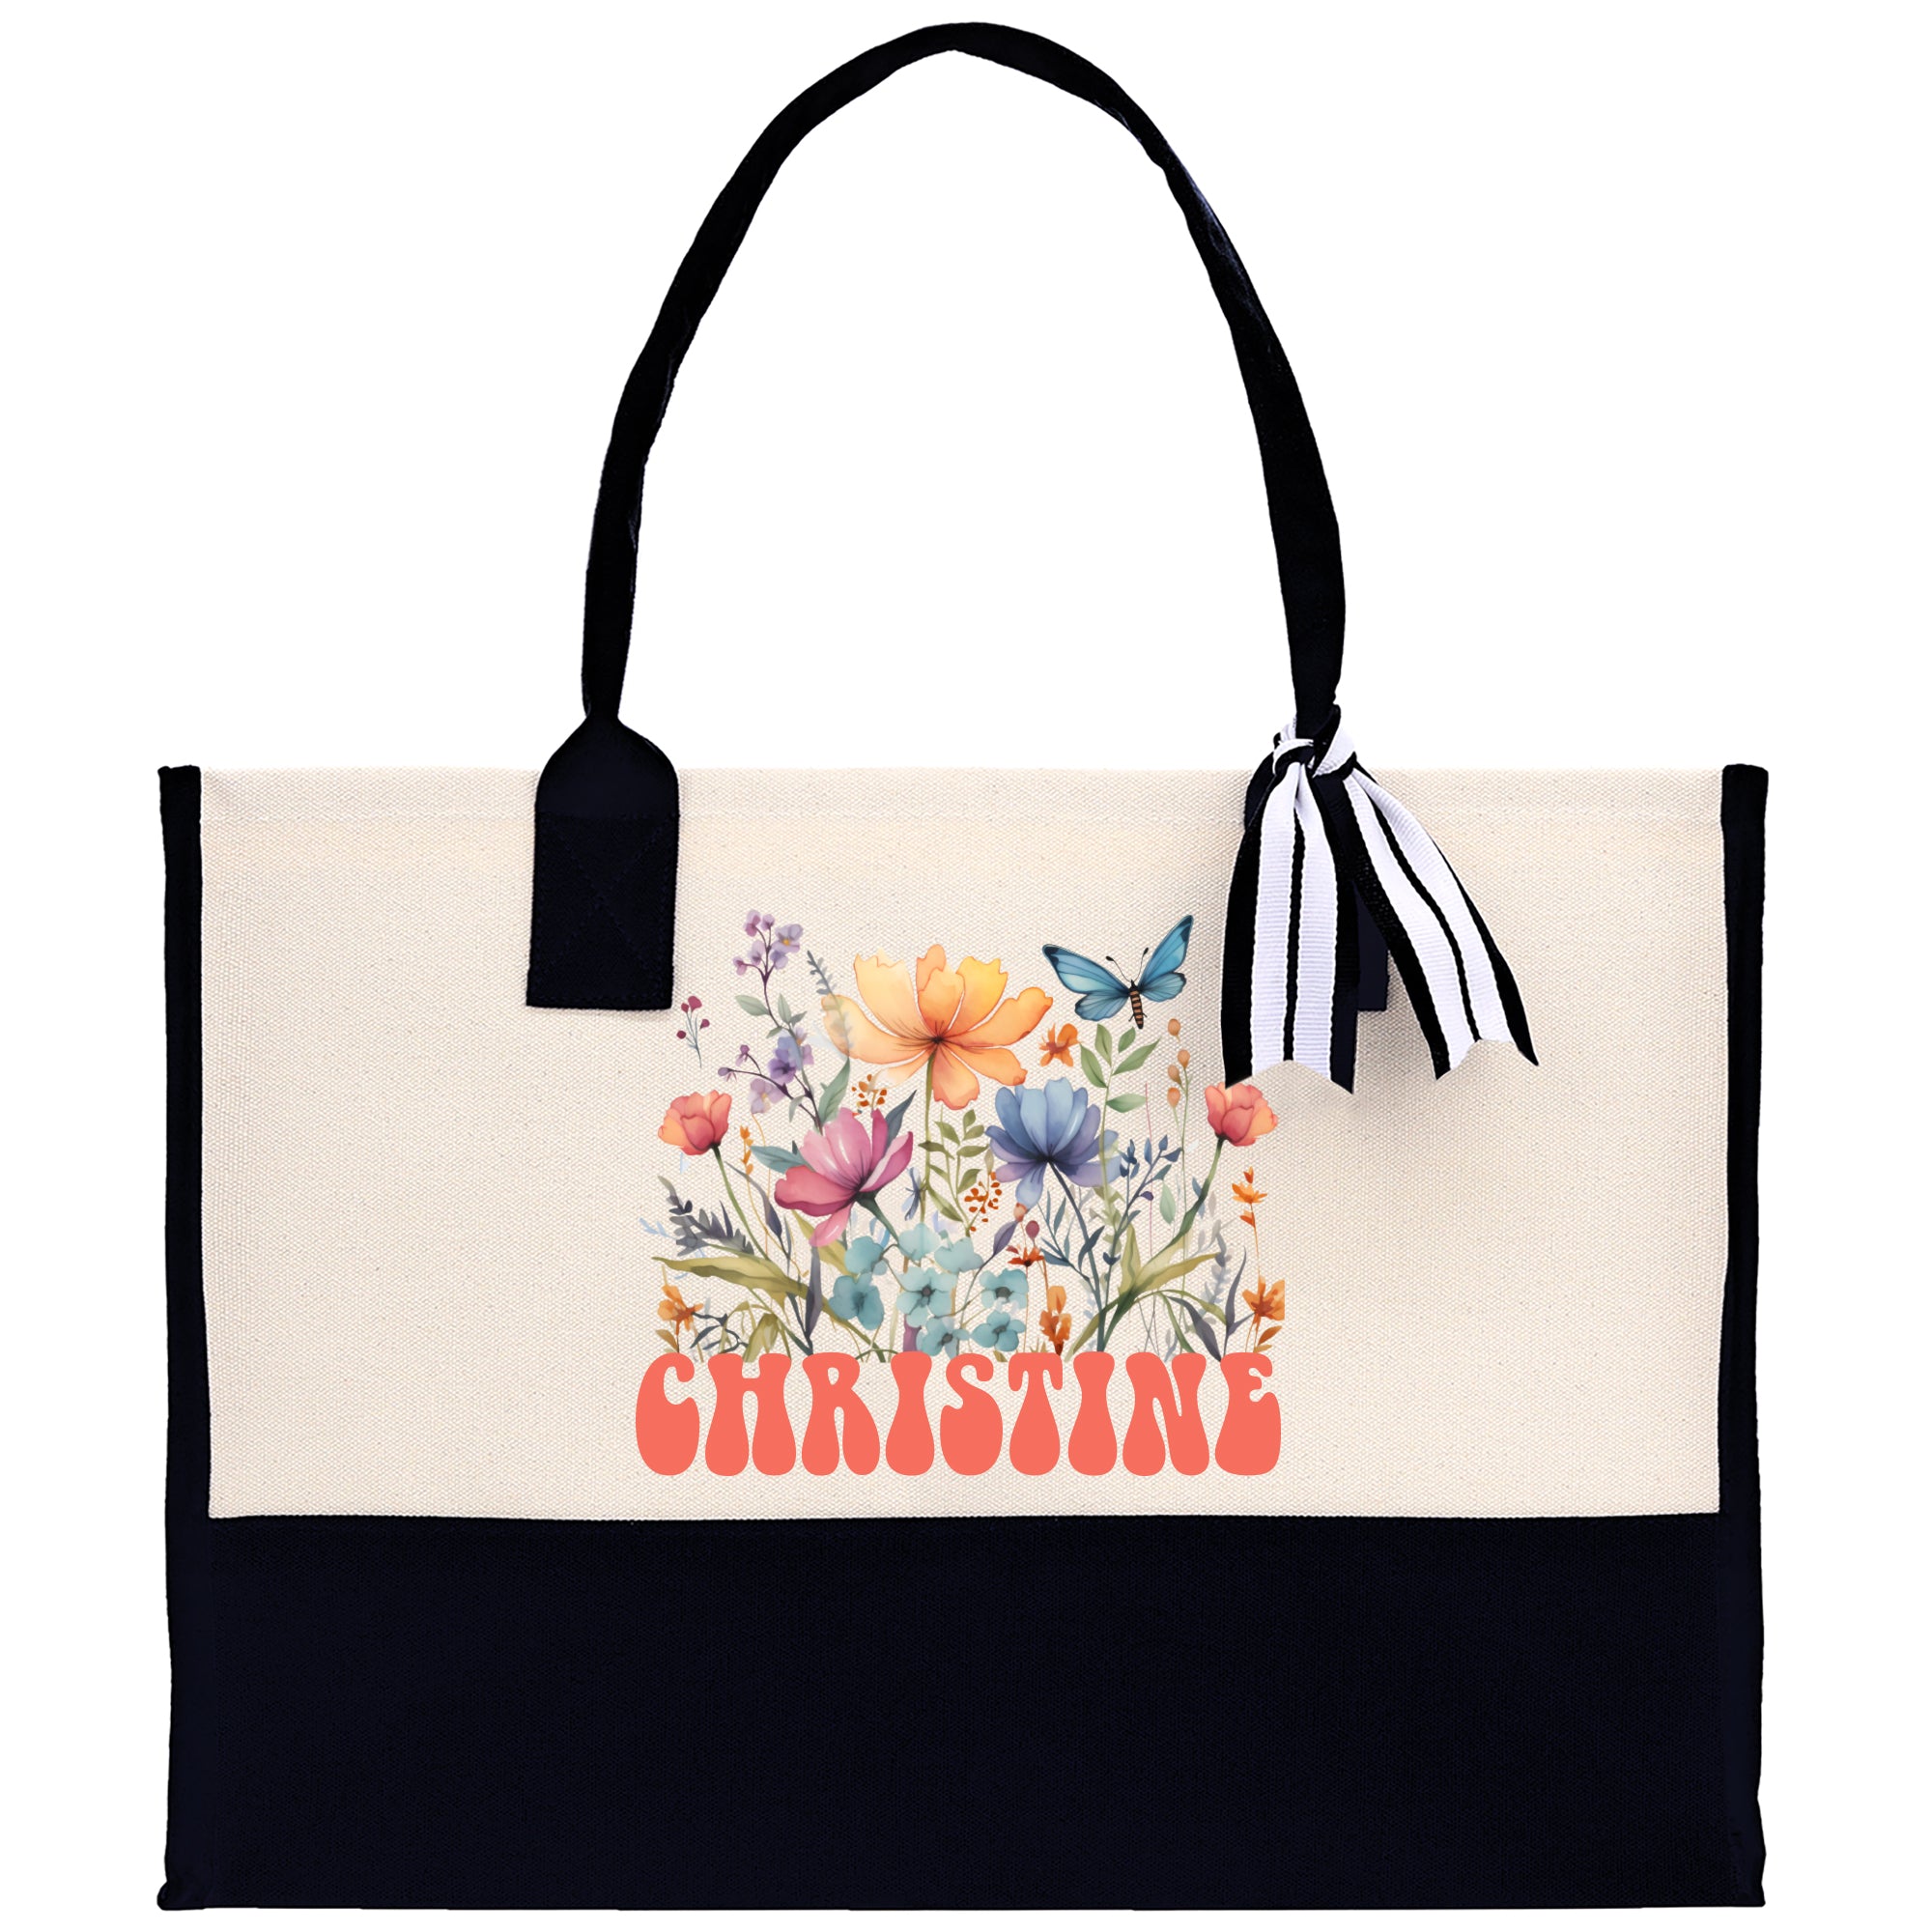 a black and white bag with flowers and butterflies on it